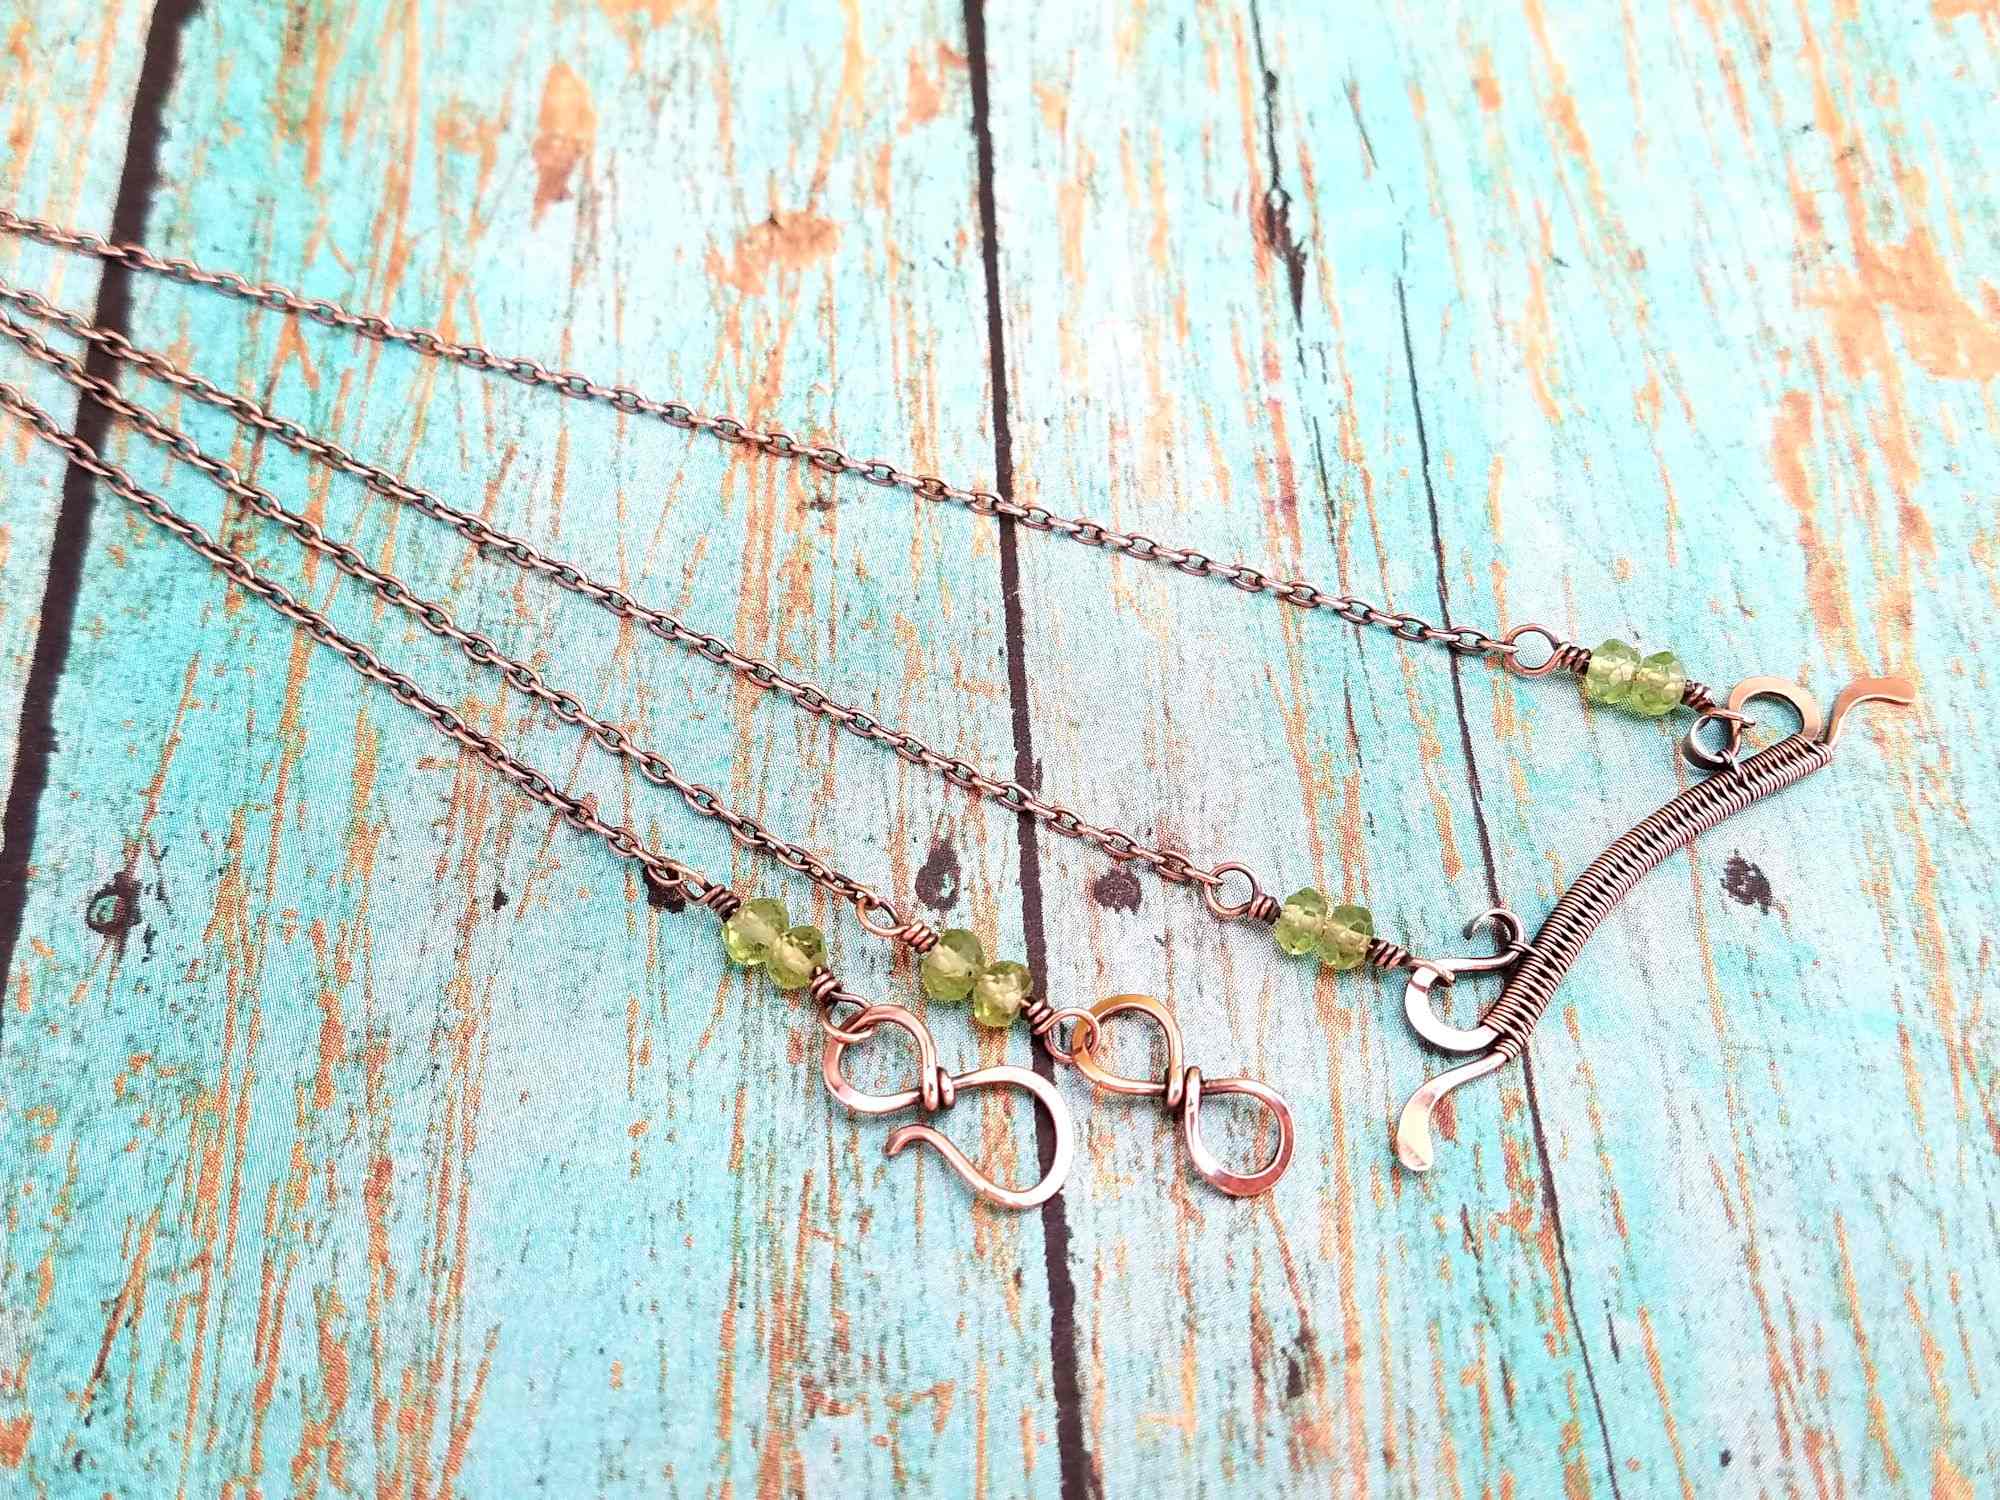 The Delicate Bar Pendant is a quick and easy wire weaving tutorial suitable for beginners. This pretty little bar pendant is very versatile as it can be used as a component in more complex pieces or it can stand on its own. It also makes a great birthstone necklace when accented with crystal or gemstone beads. The necklace pictured here is accented with genuine Peridot beads, wich work beautifully with the copper wire use to make the pendant.